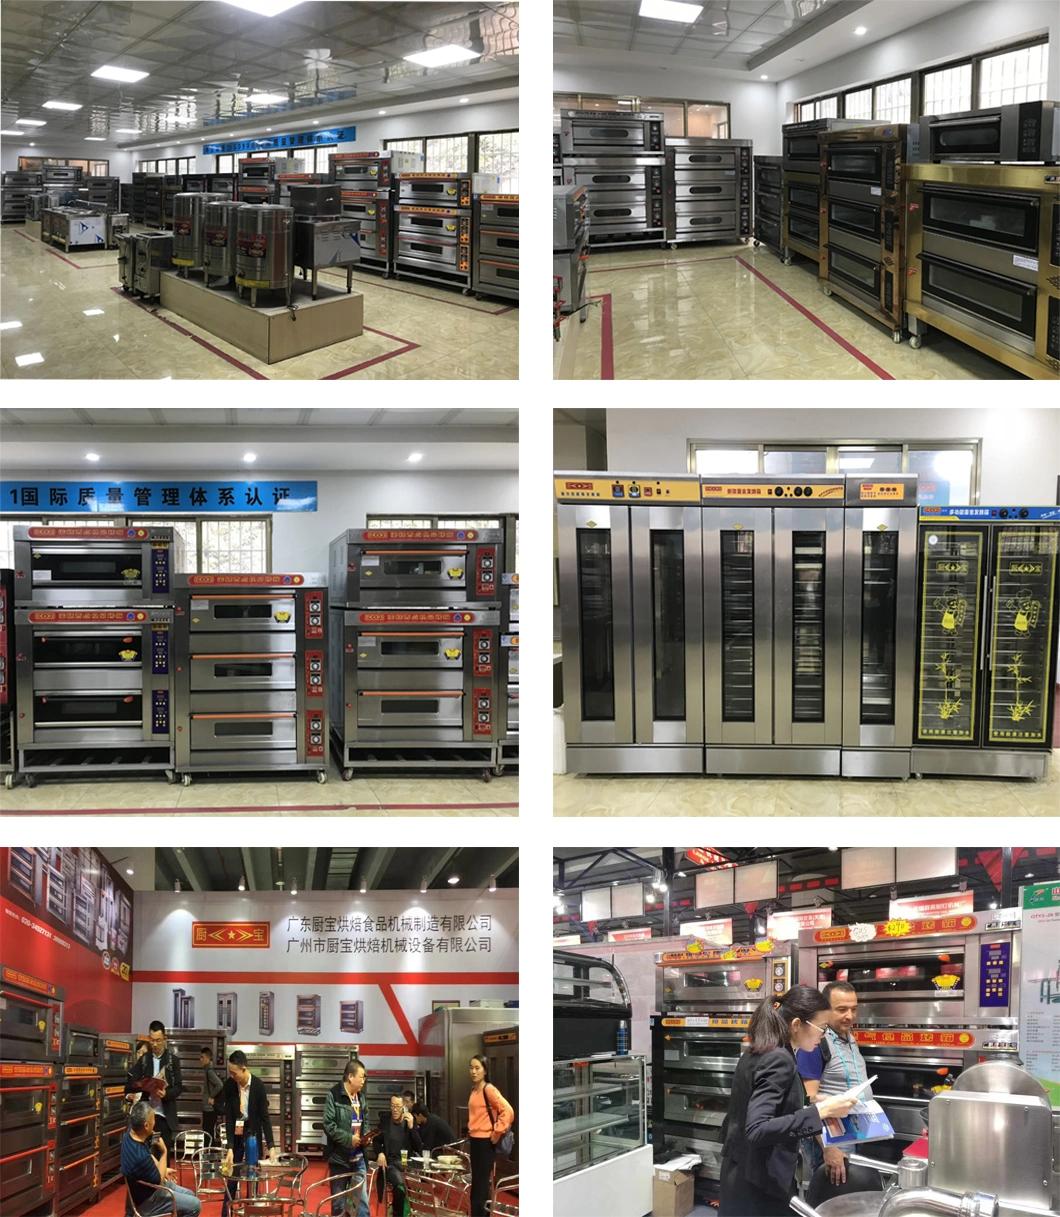 1 Deck 2 Trays Gas Pizza Oven for Commercial Kitchen Baking Equipment Bakery Machinery Food Machine